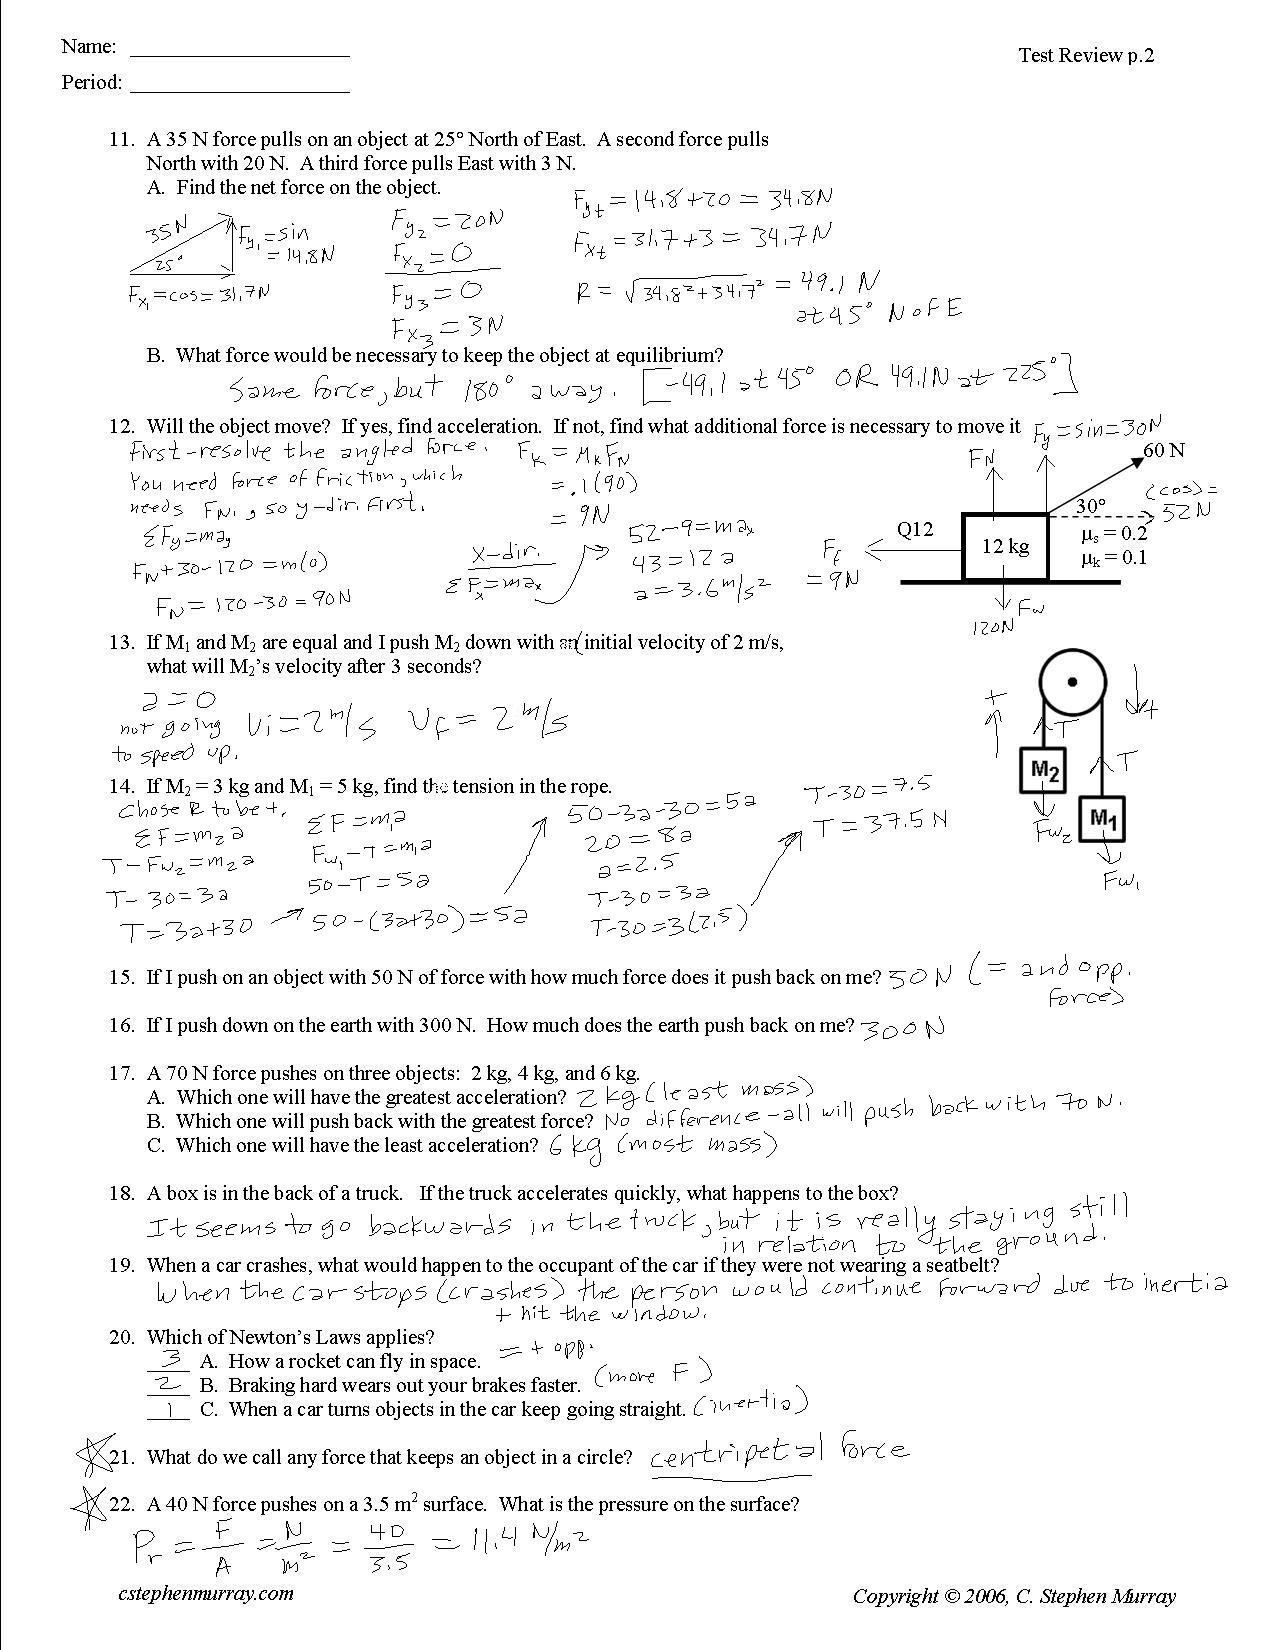 Newton Laws Worksheet Answers Newtons Laws Worksheet Answers Promotiontablecovers